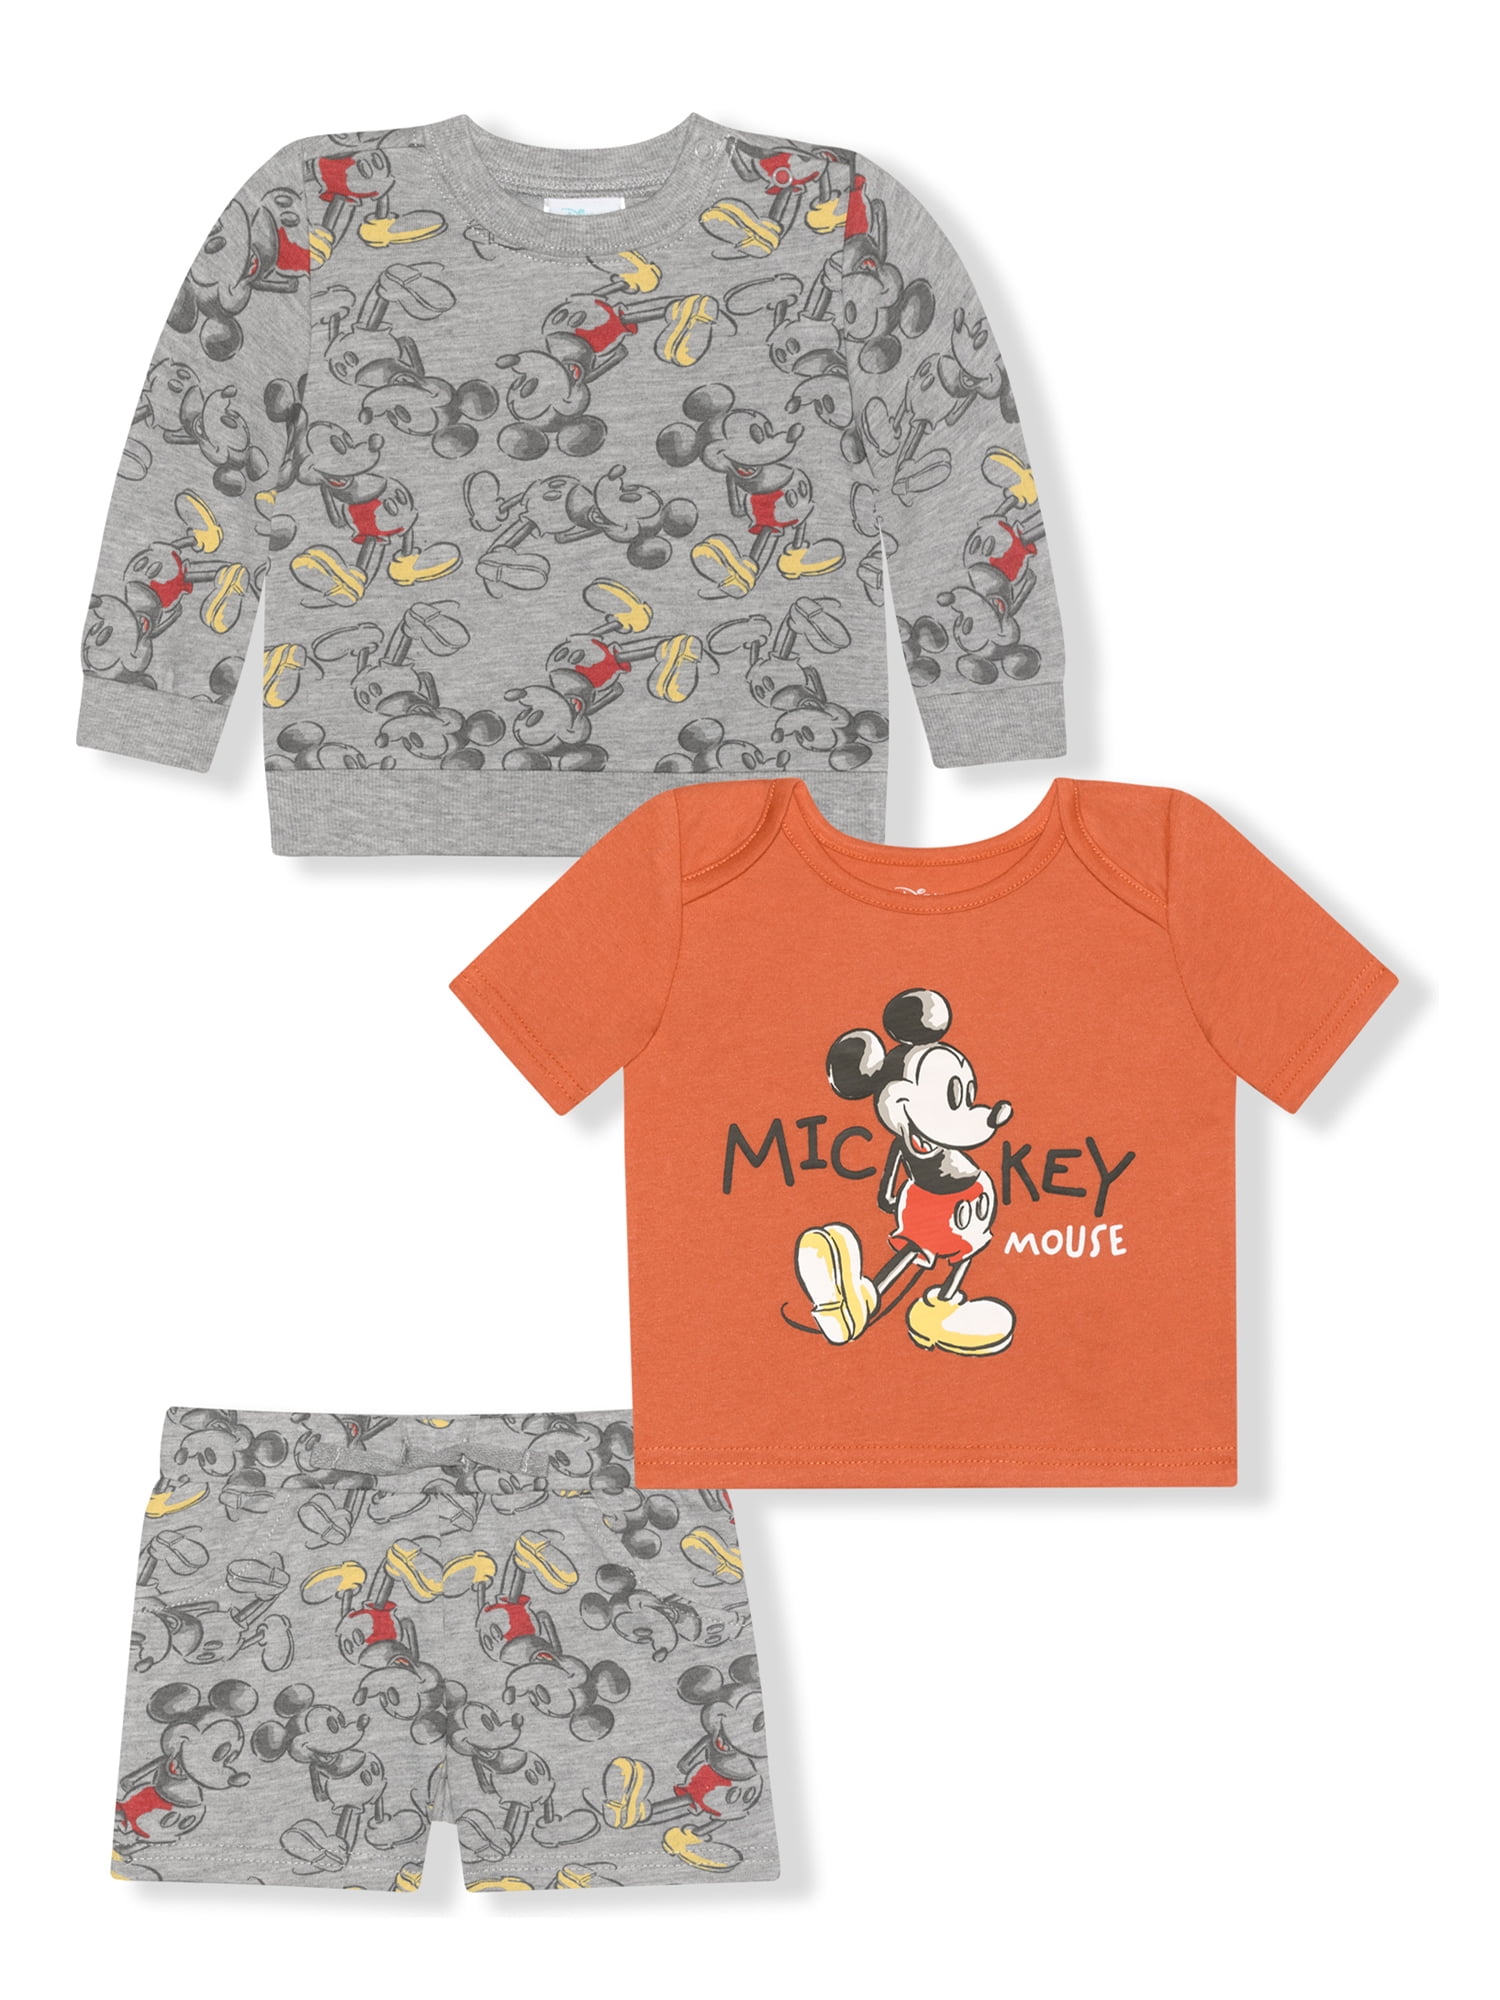 Disney Micky Mouse Baby New Born 3-6 mo Childrens Clothes Shirt Pants Set Kids 